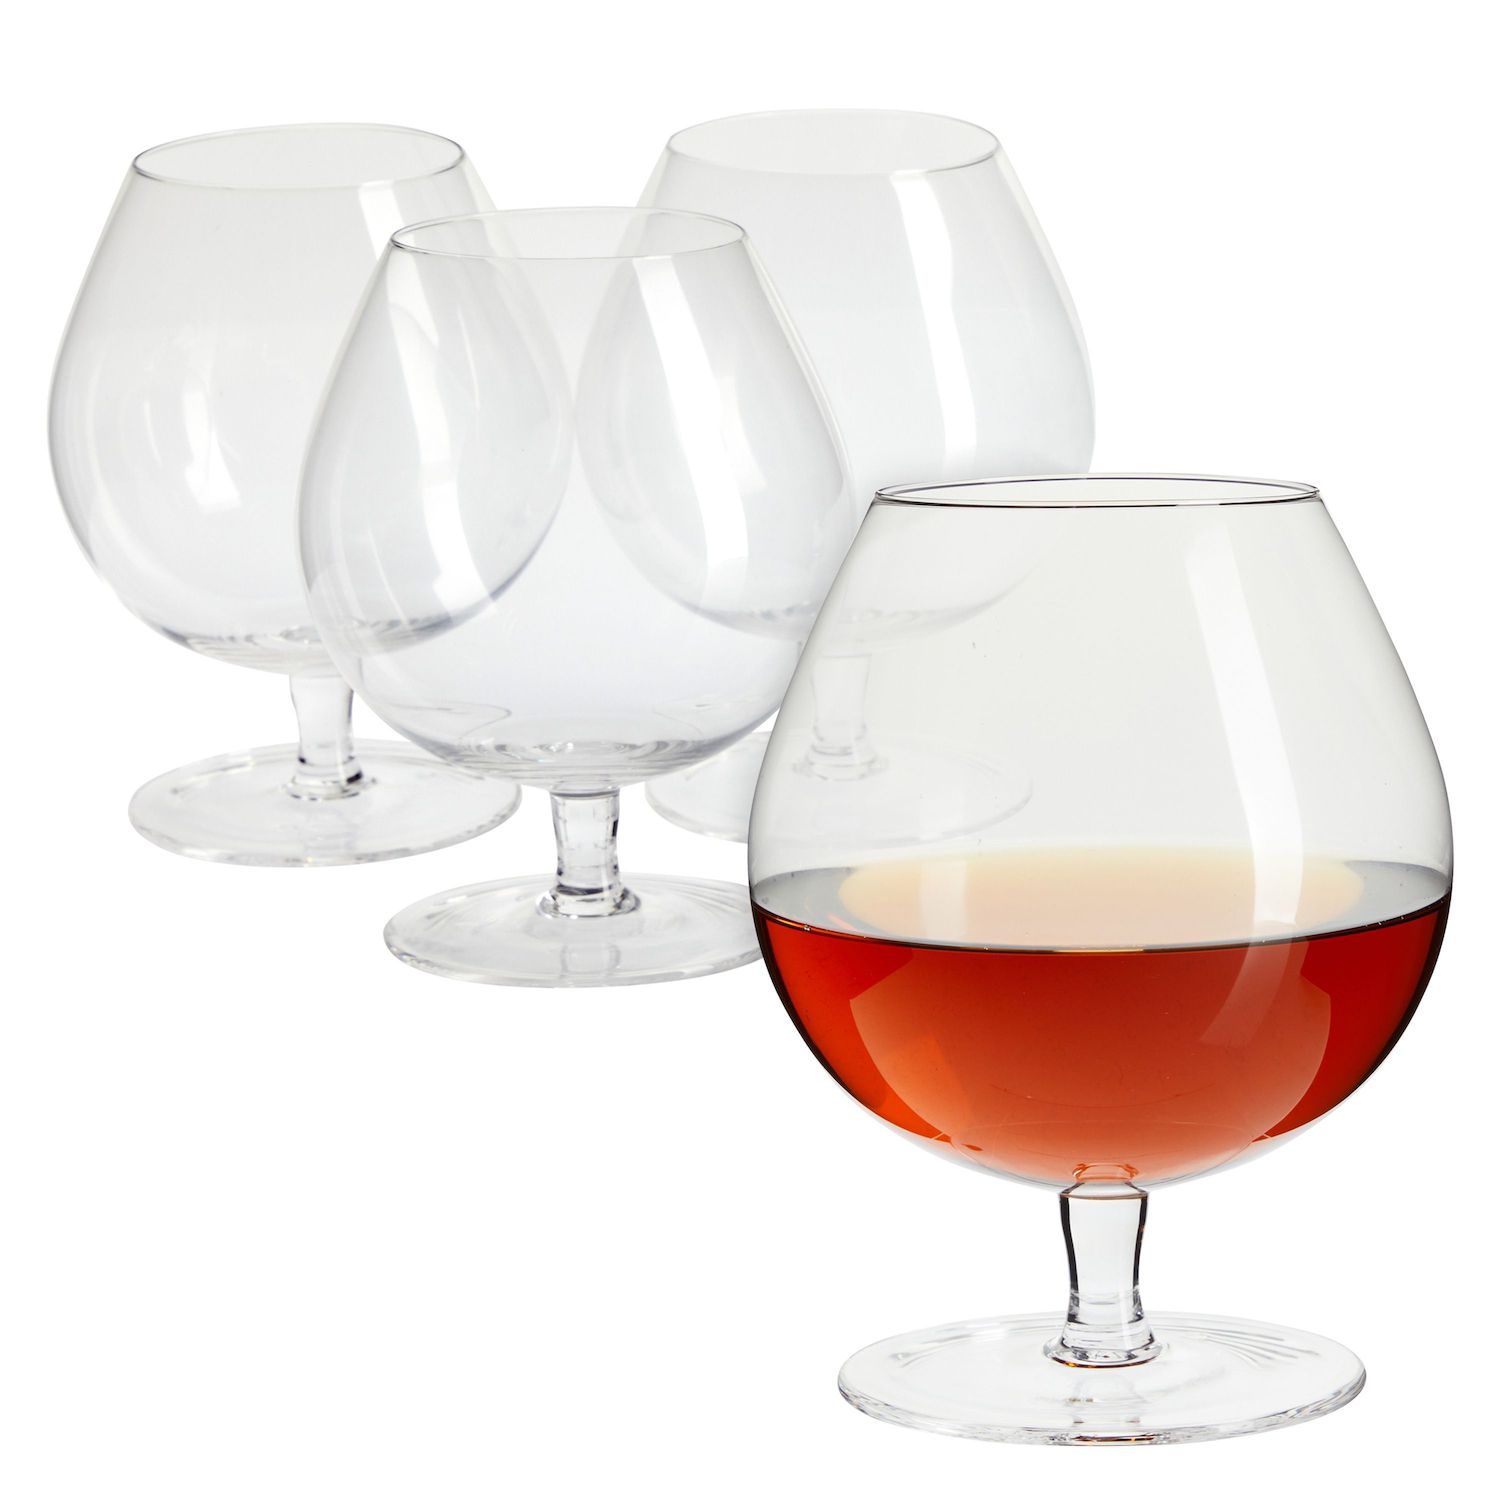 Juvale Set of 4 Small Clear Glass Stemmed Wine Glasses, 4.5 Ounces